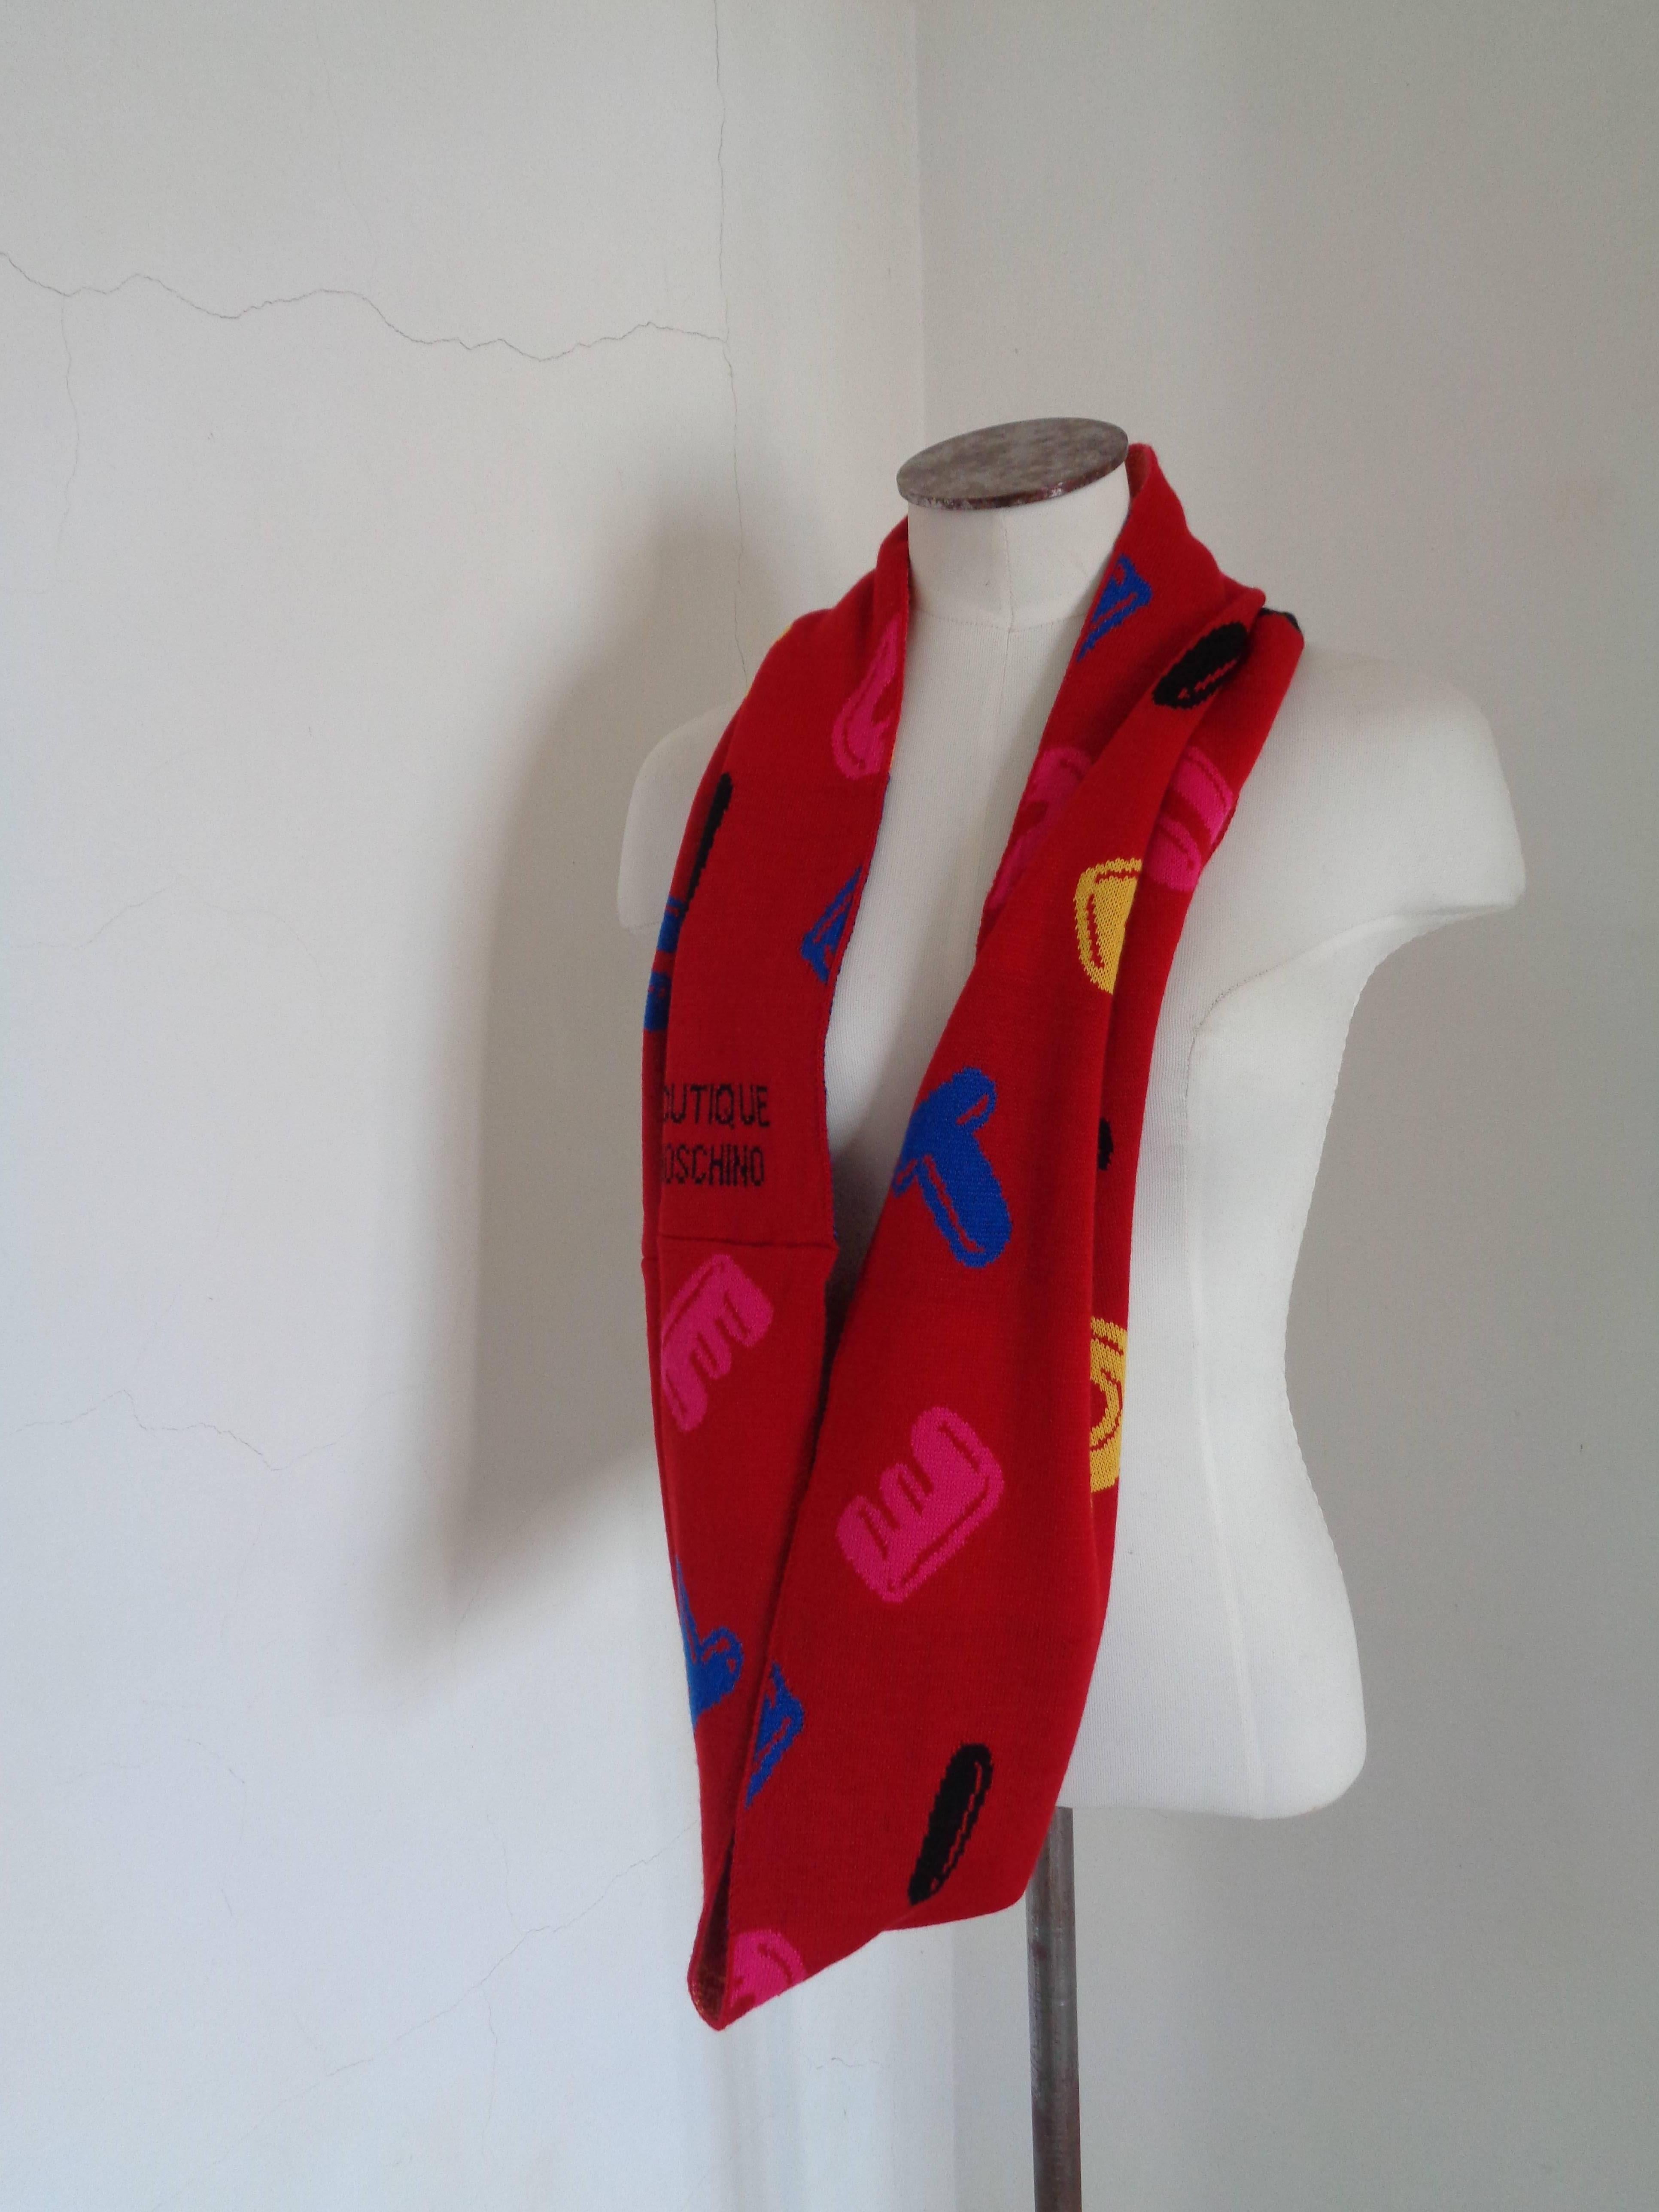 Moschino Boutique Wool Scarf NWOT
Composition: Wool
Measurements: 73*73 cm
Heigh 13 cm